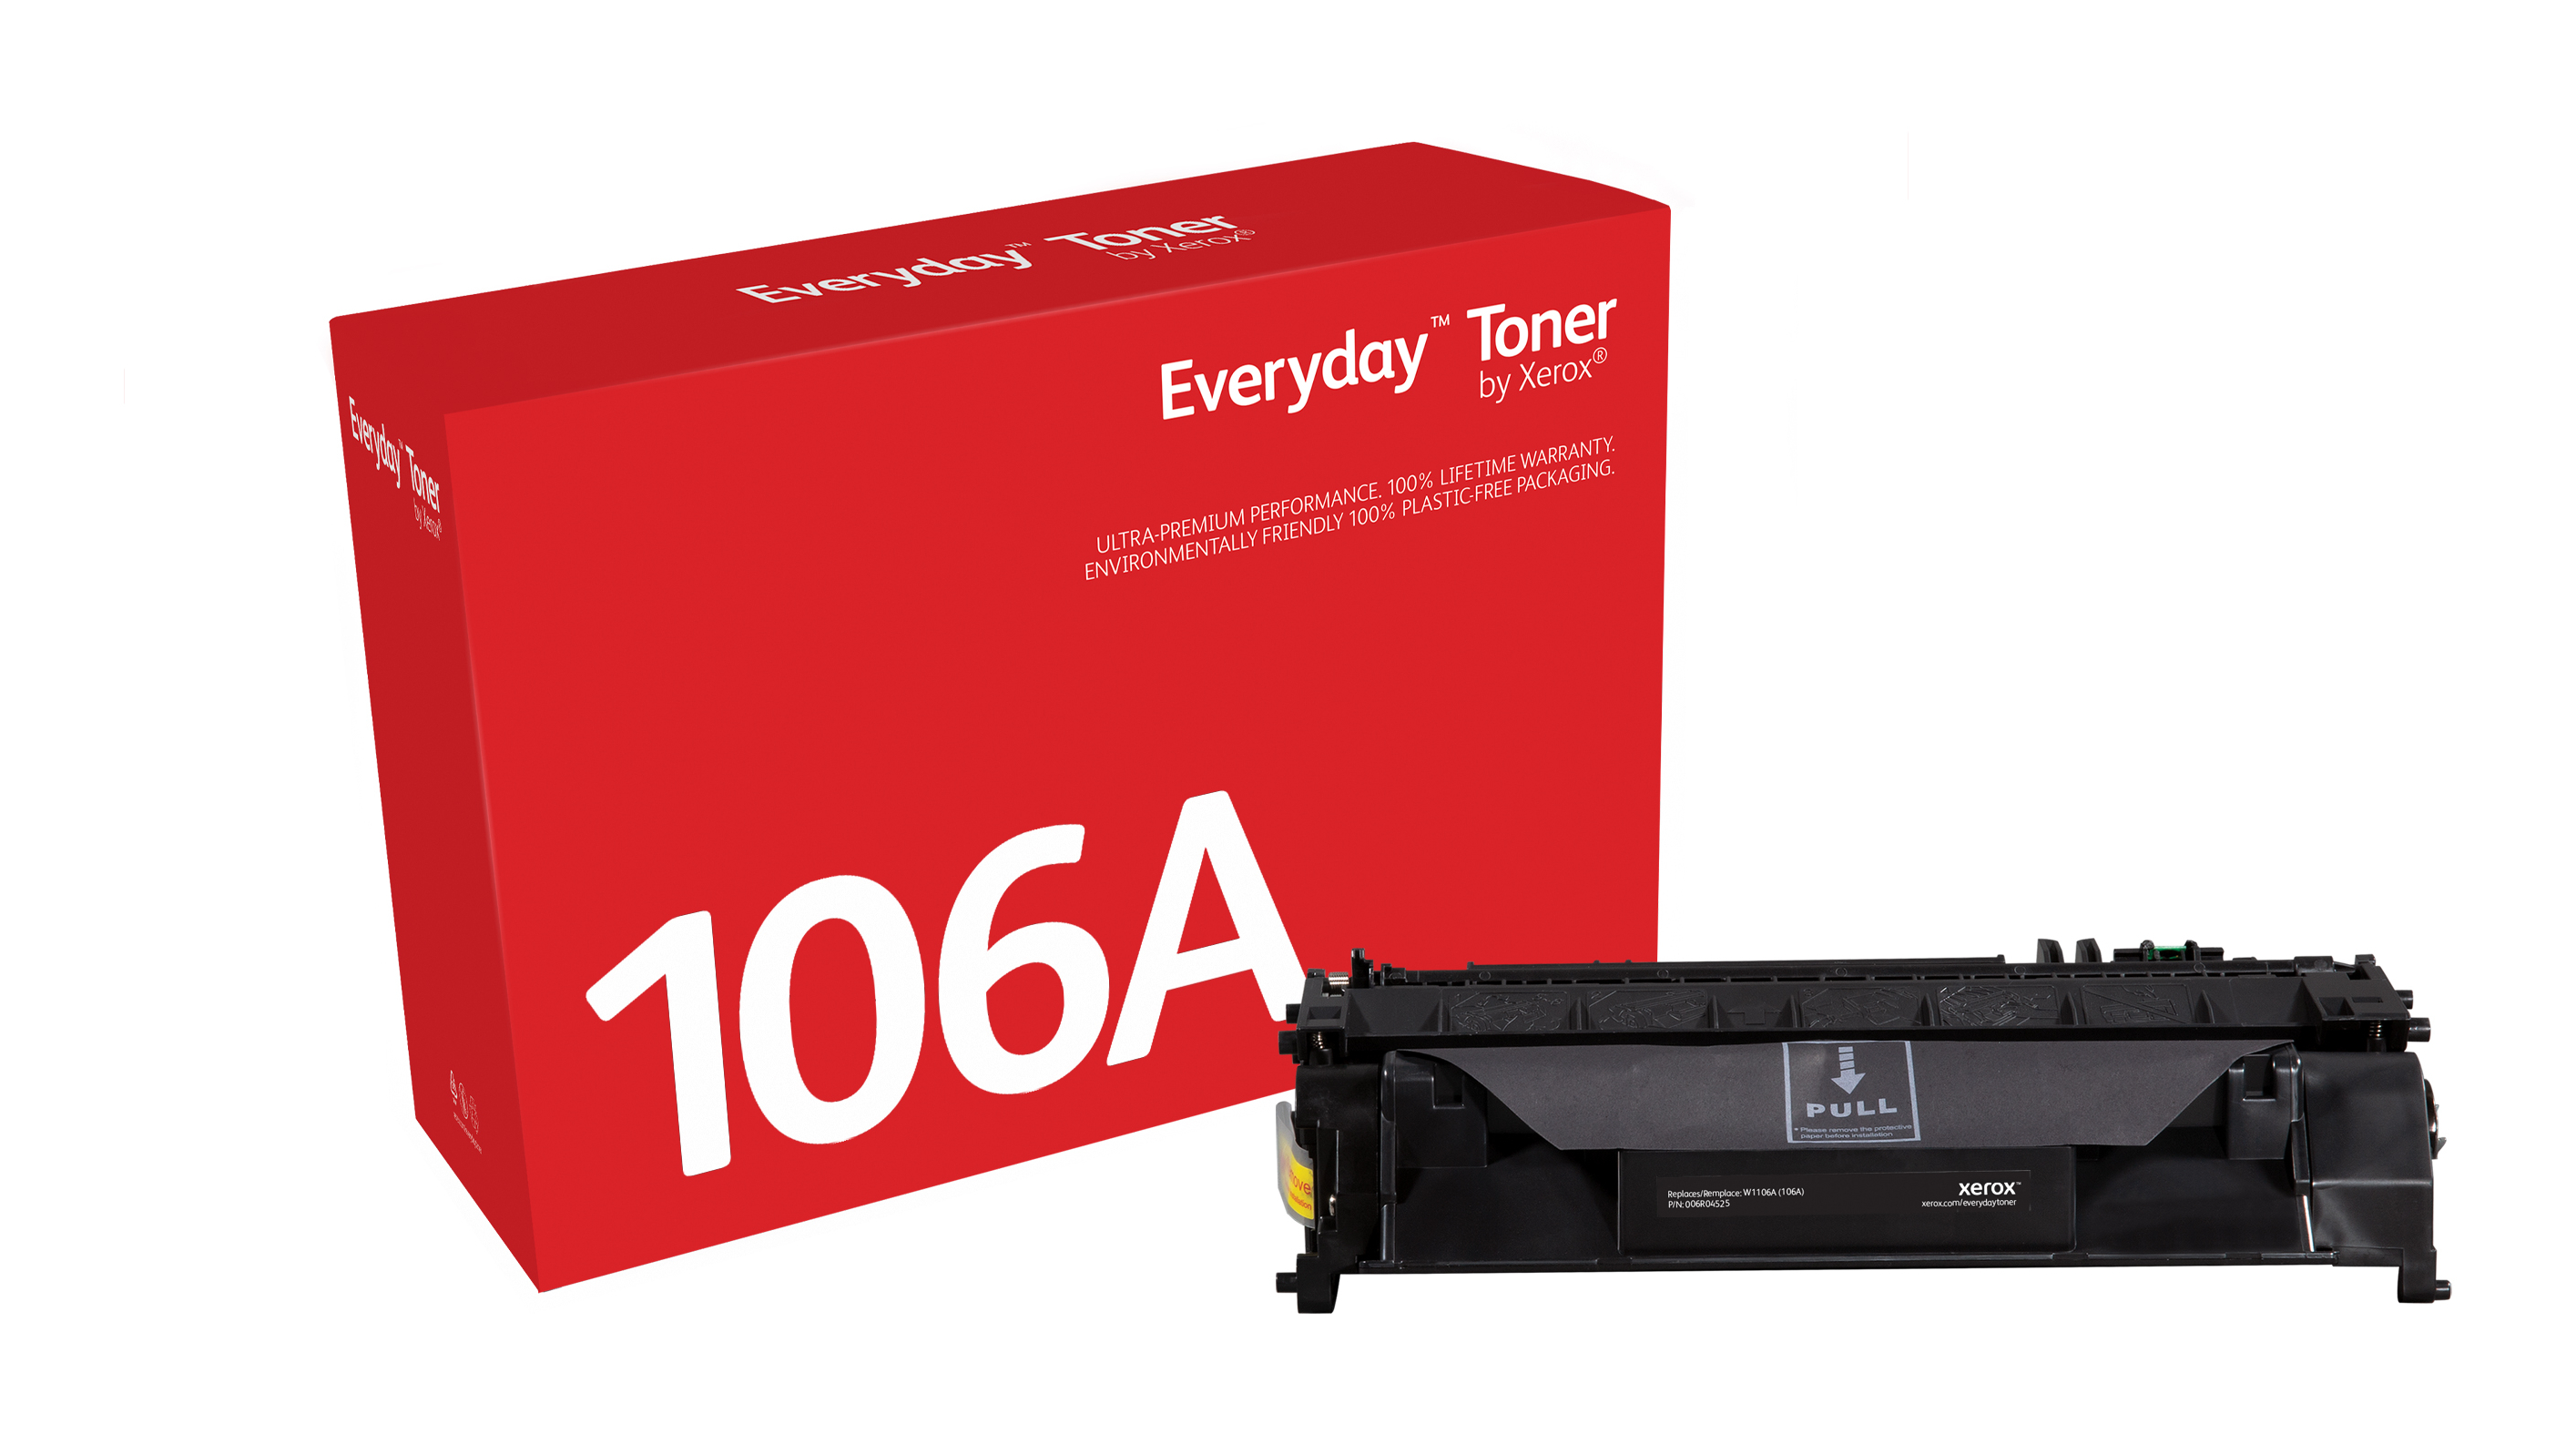 Everyday Black Toner with 106A (W1106A), Standard Yield 006R04525 by Xerox